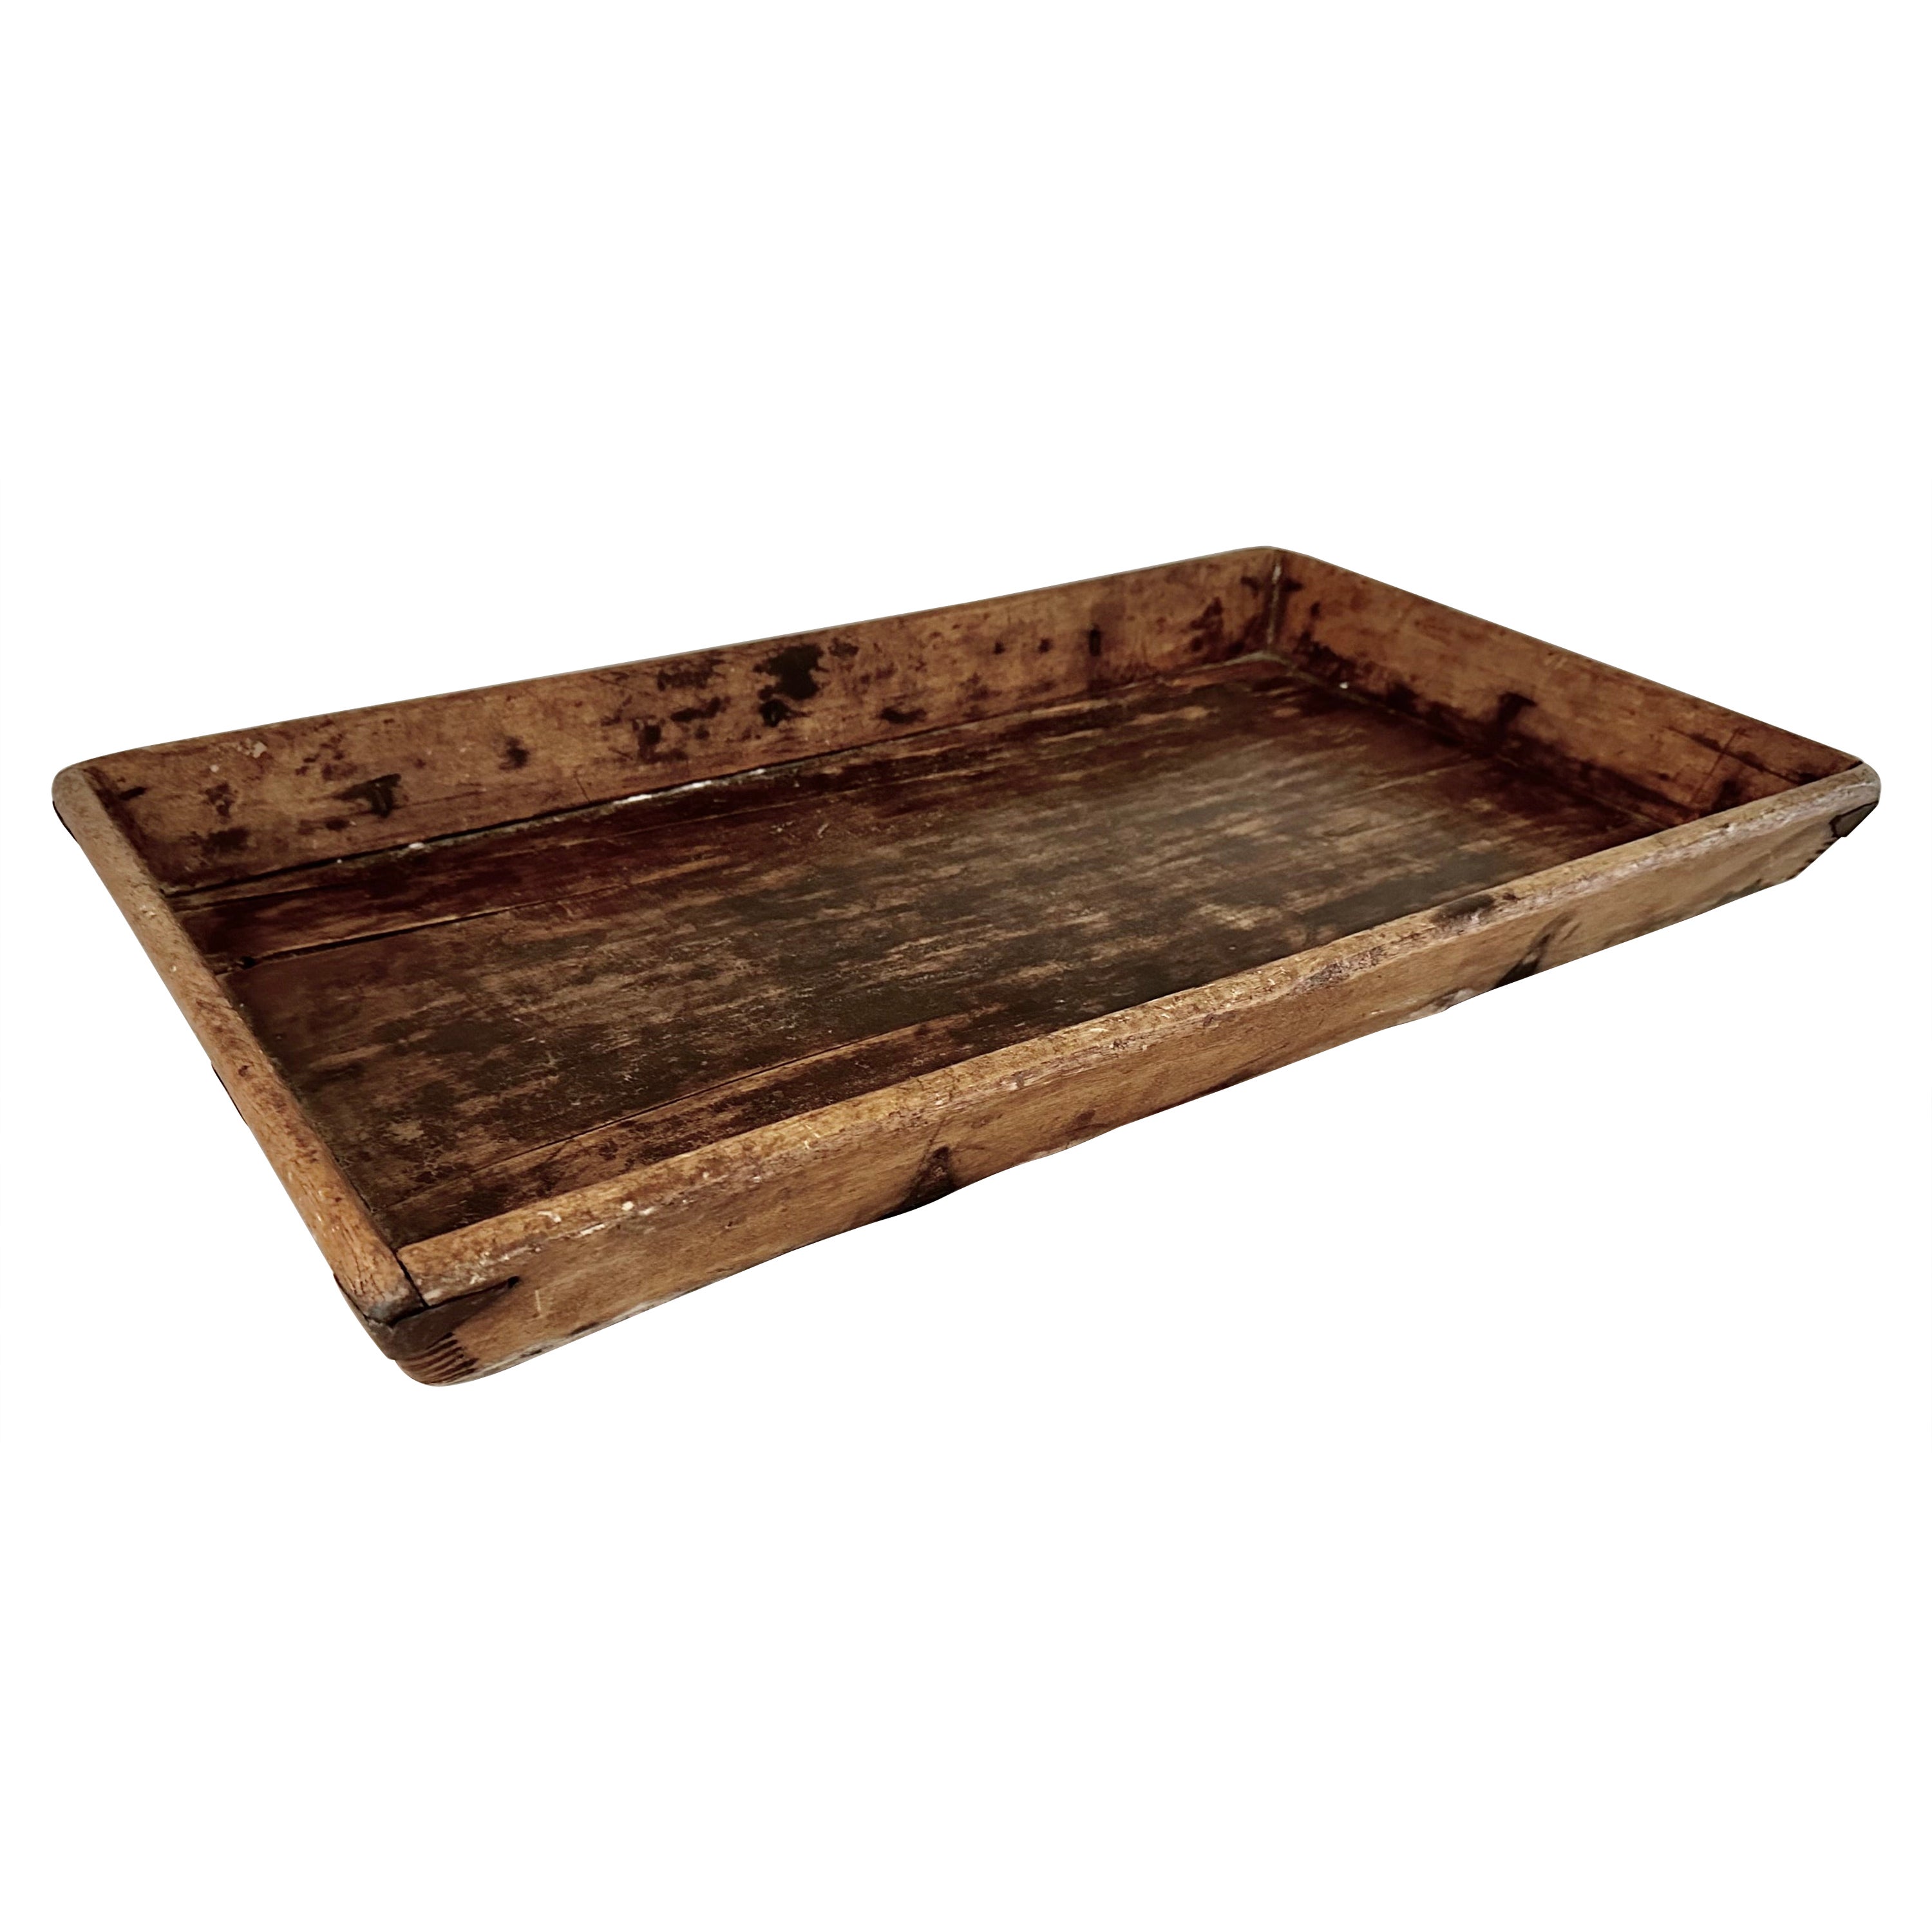 Rustic Provincial Style Chinese Tea Tray